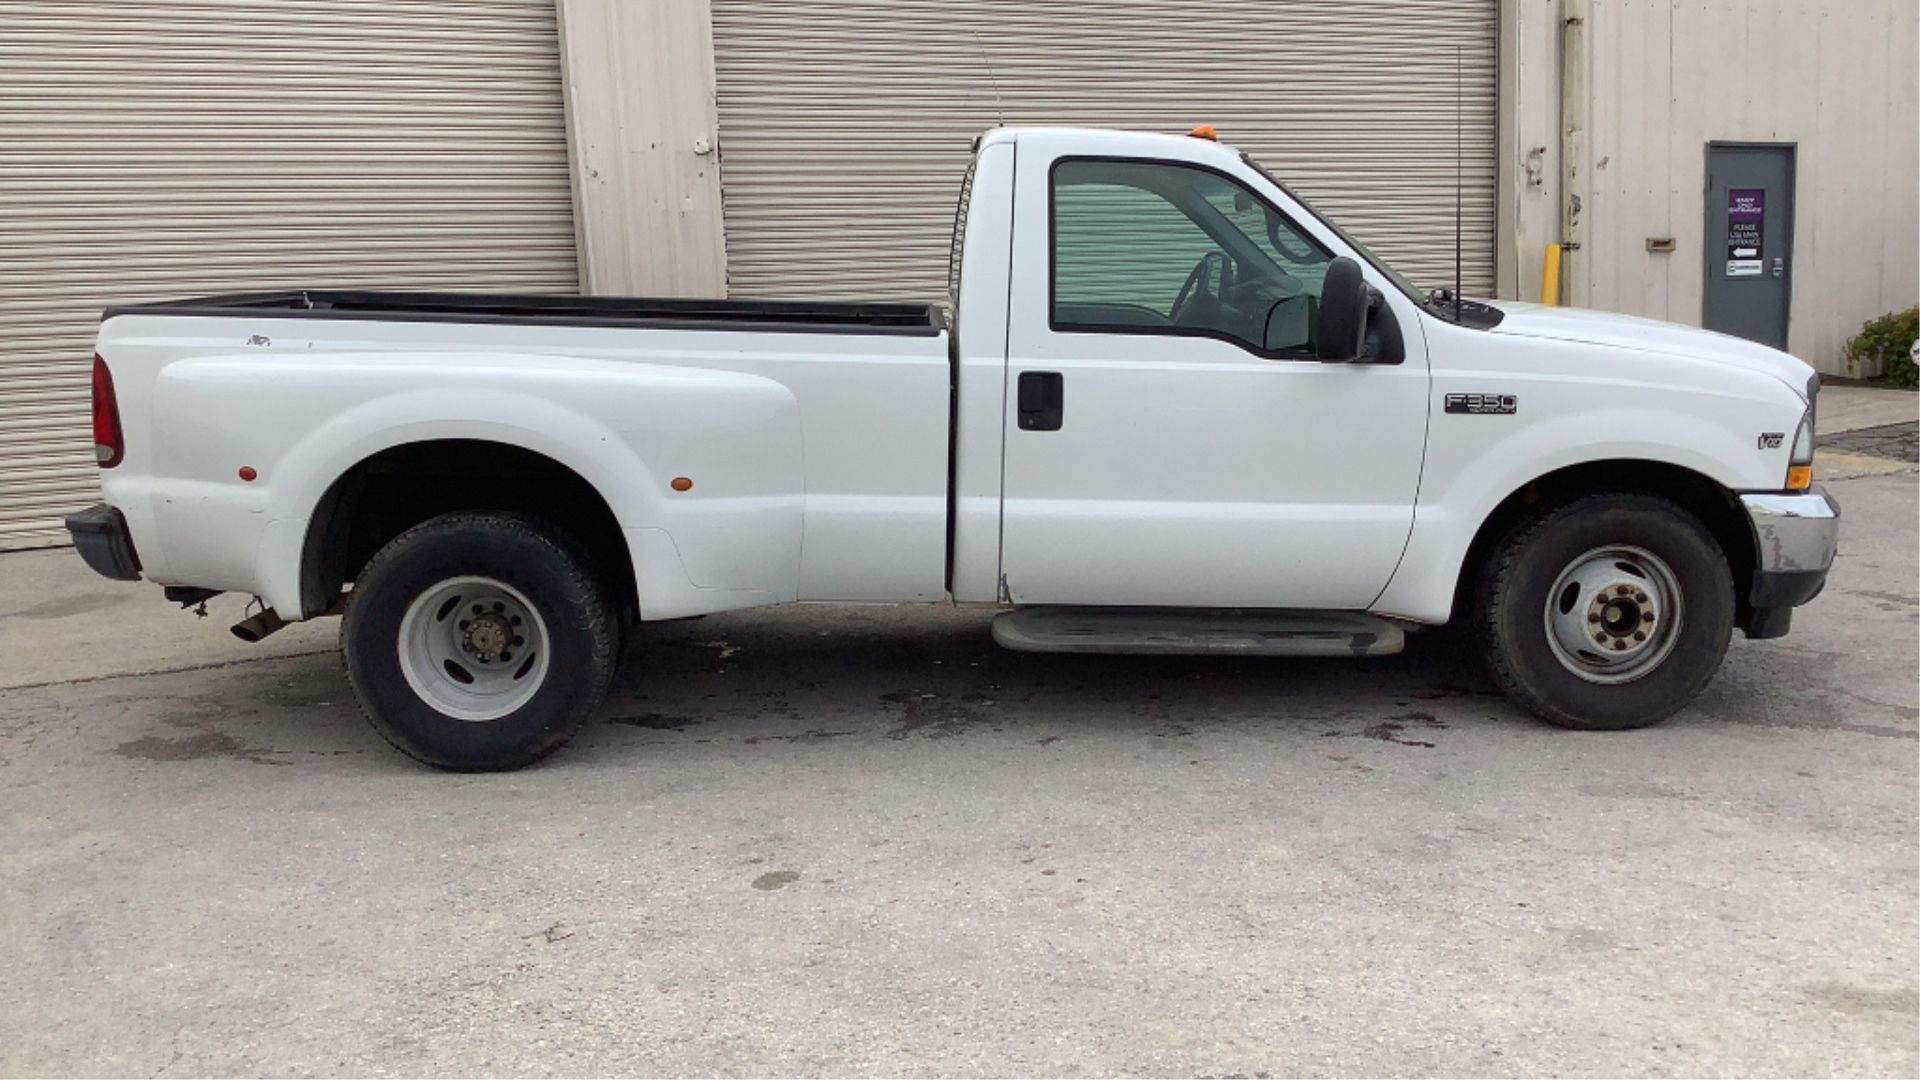 2002 Ford F-350 Regular Cab Dually 2WD - Image 23 of 89